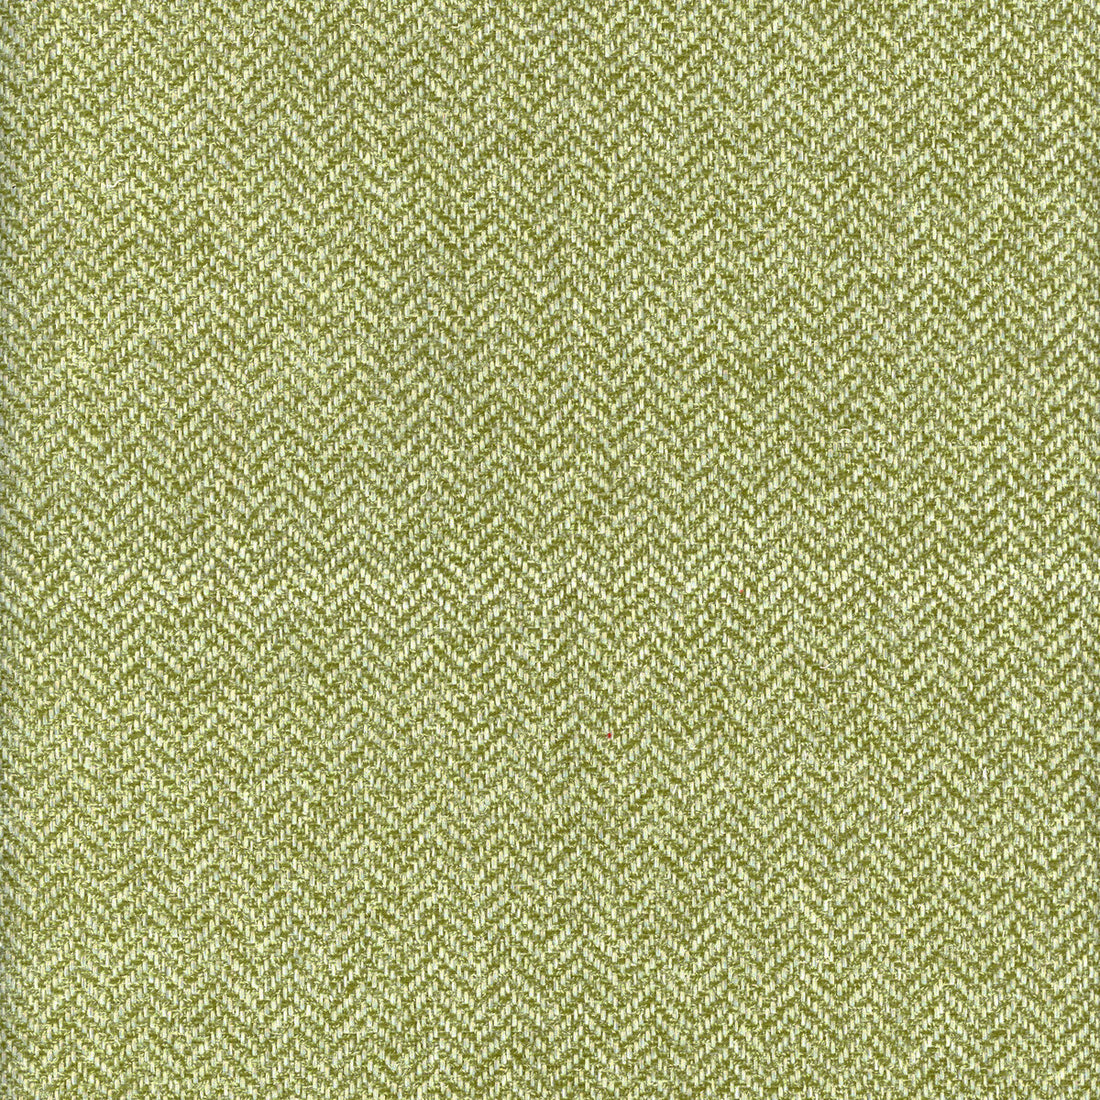 Nevada fabric in meadow color - pattern AM100329.3.0 - by Kravet Couture in the Andrew Martin Canyon collection